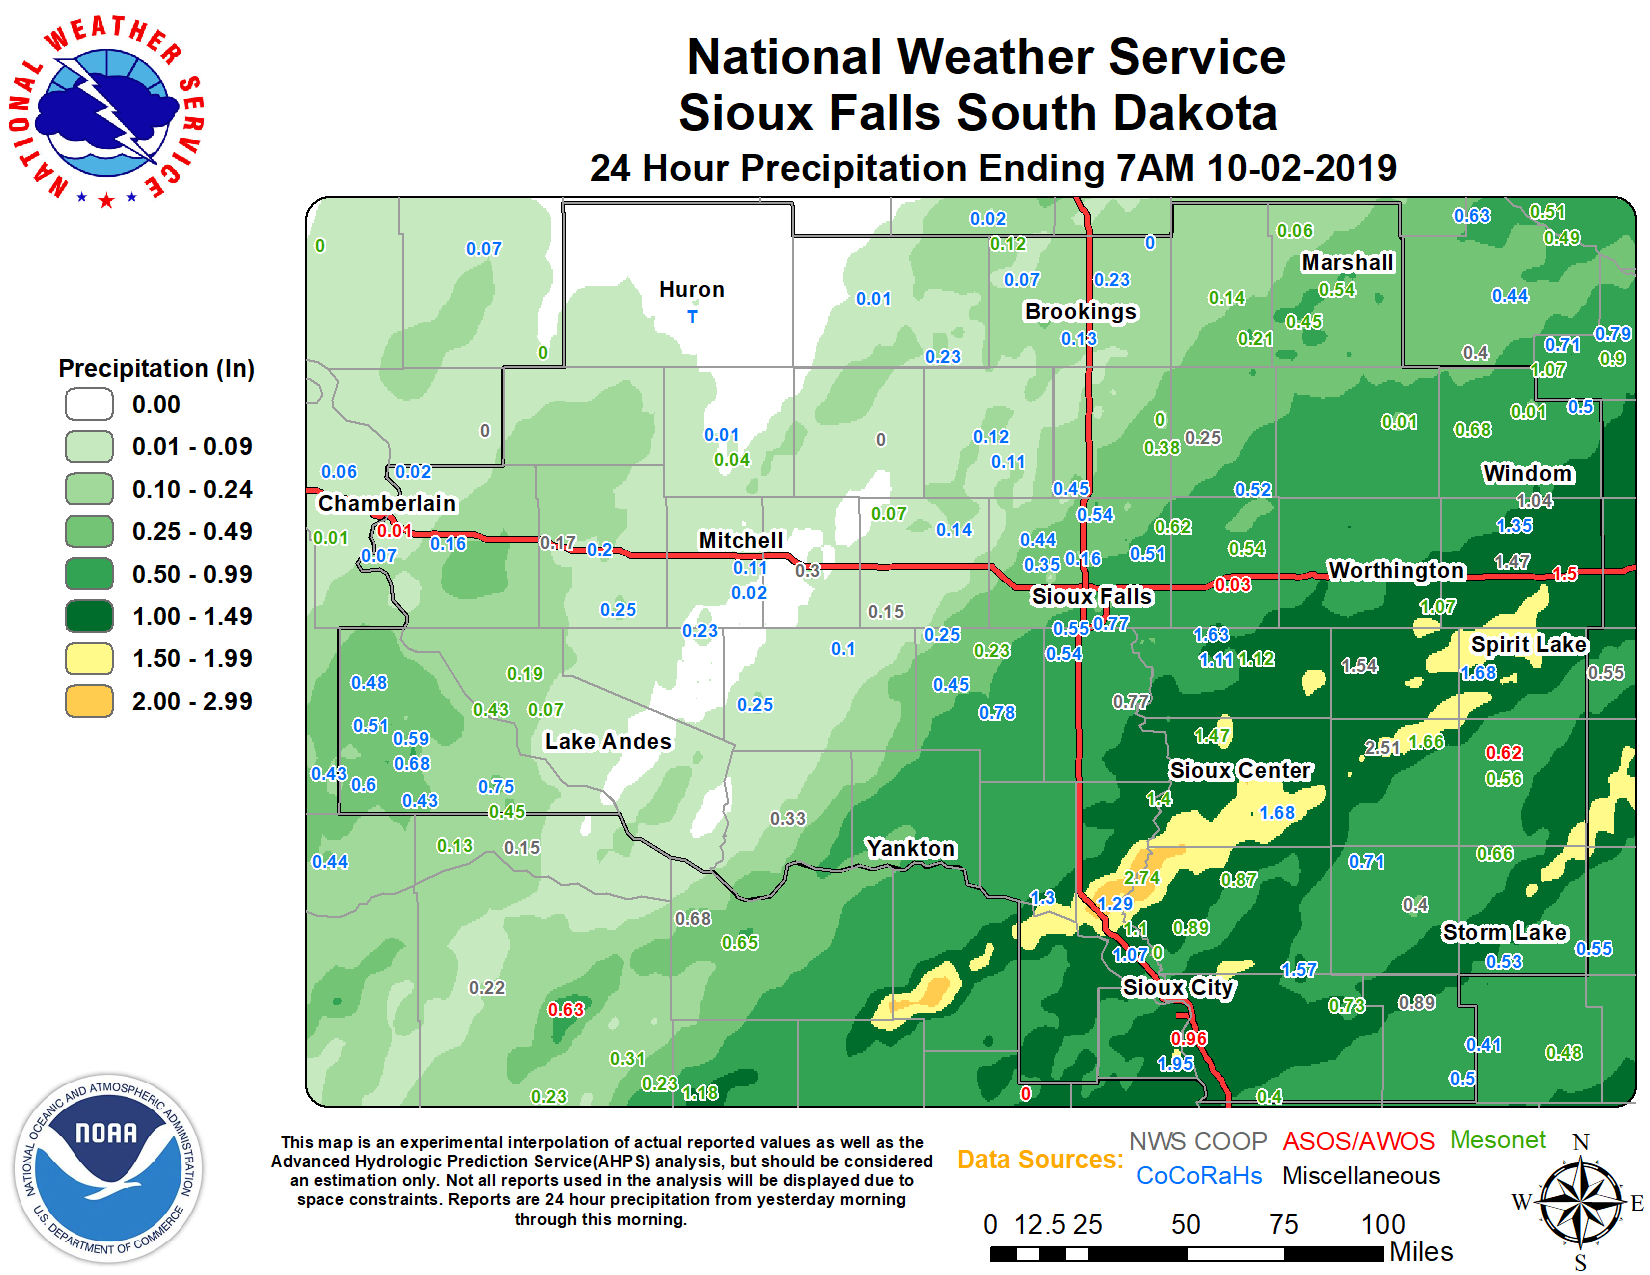 24-hour rainfall ending at 7 AM, October 2, 2019